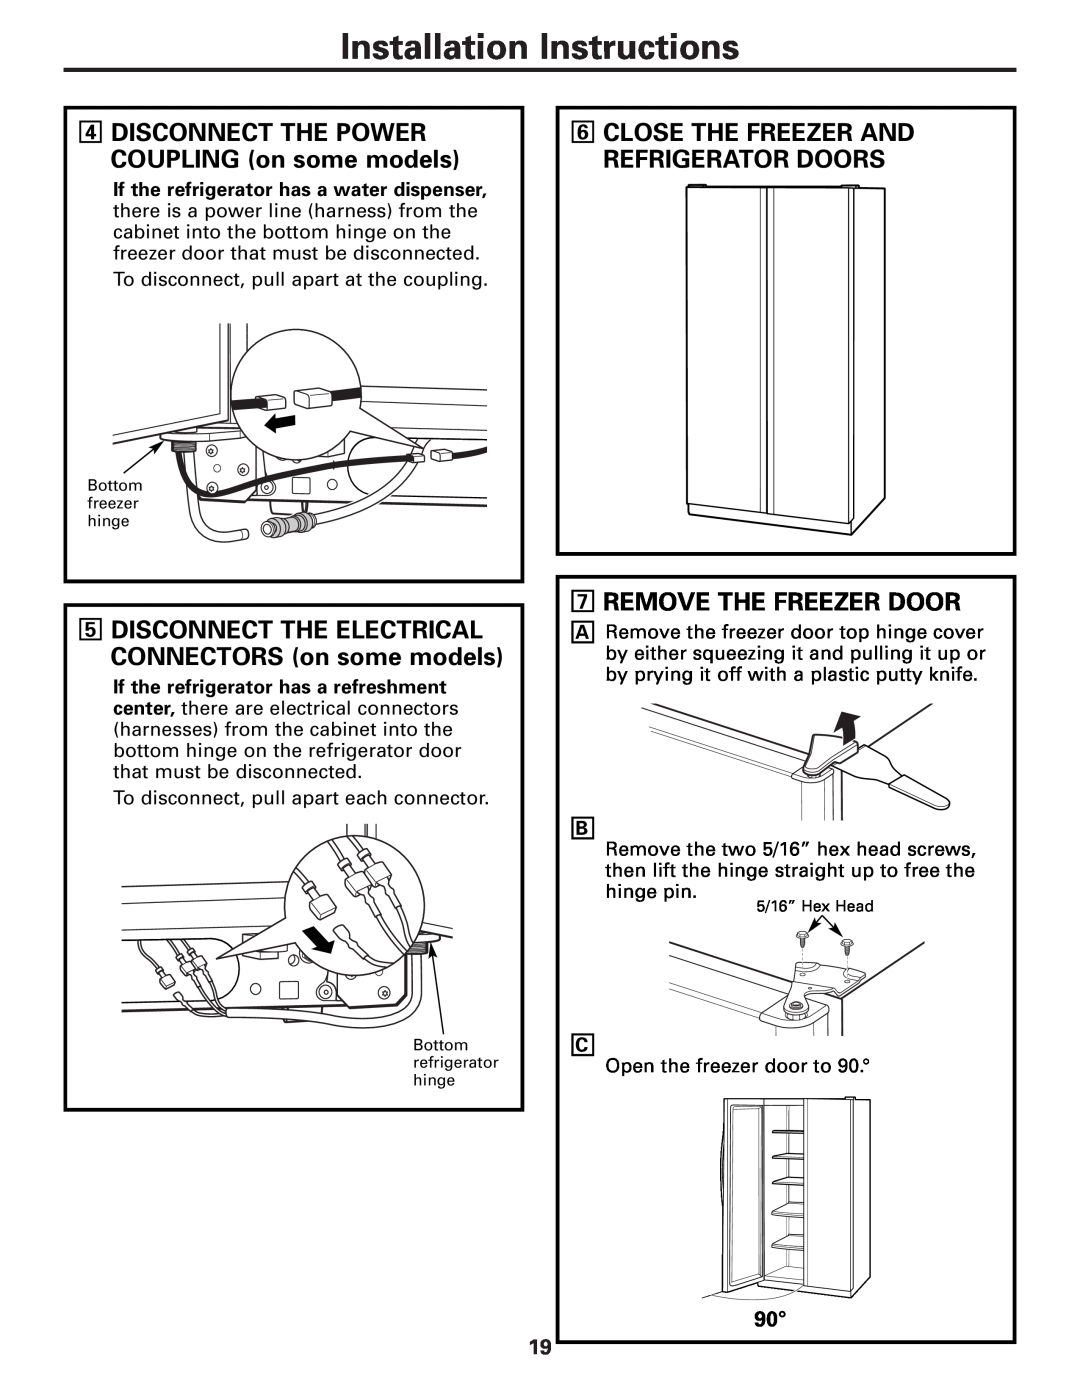 GE MODELS 23 AND 25 Installation Instructions, Remove The Freezer Door, DISCONNECT THE POWER COUPLING on some models 